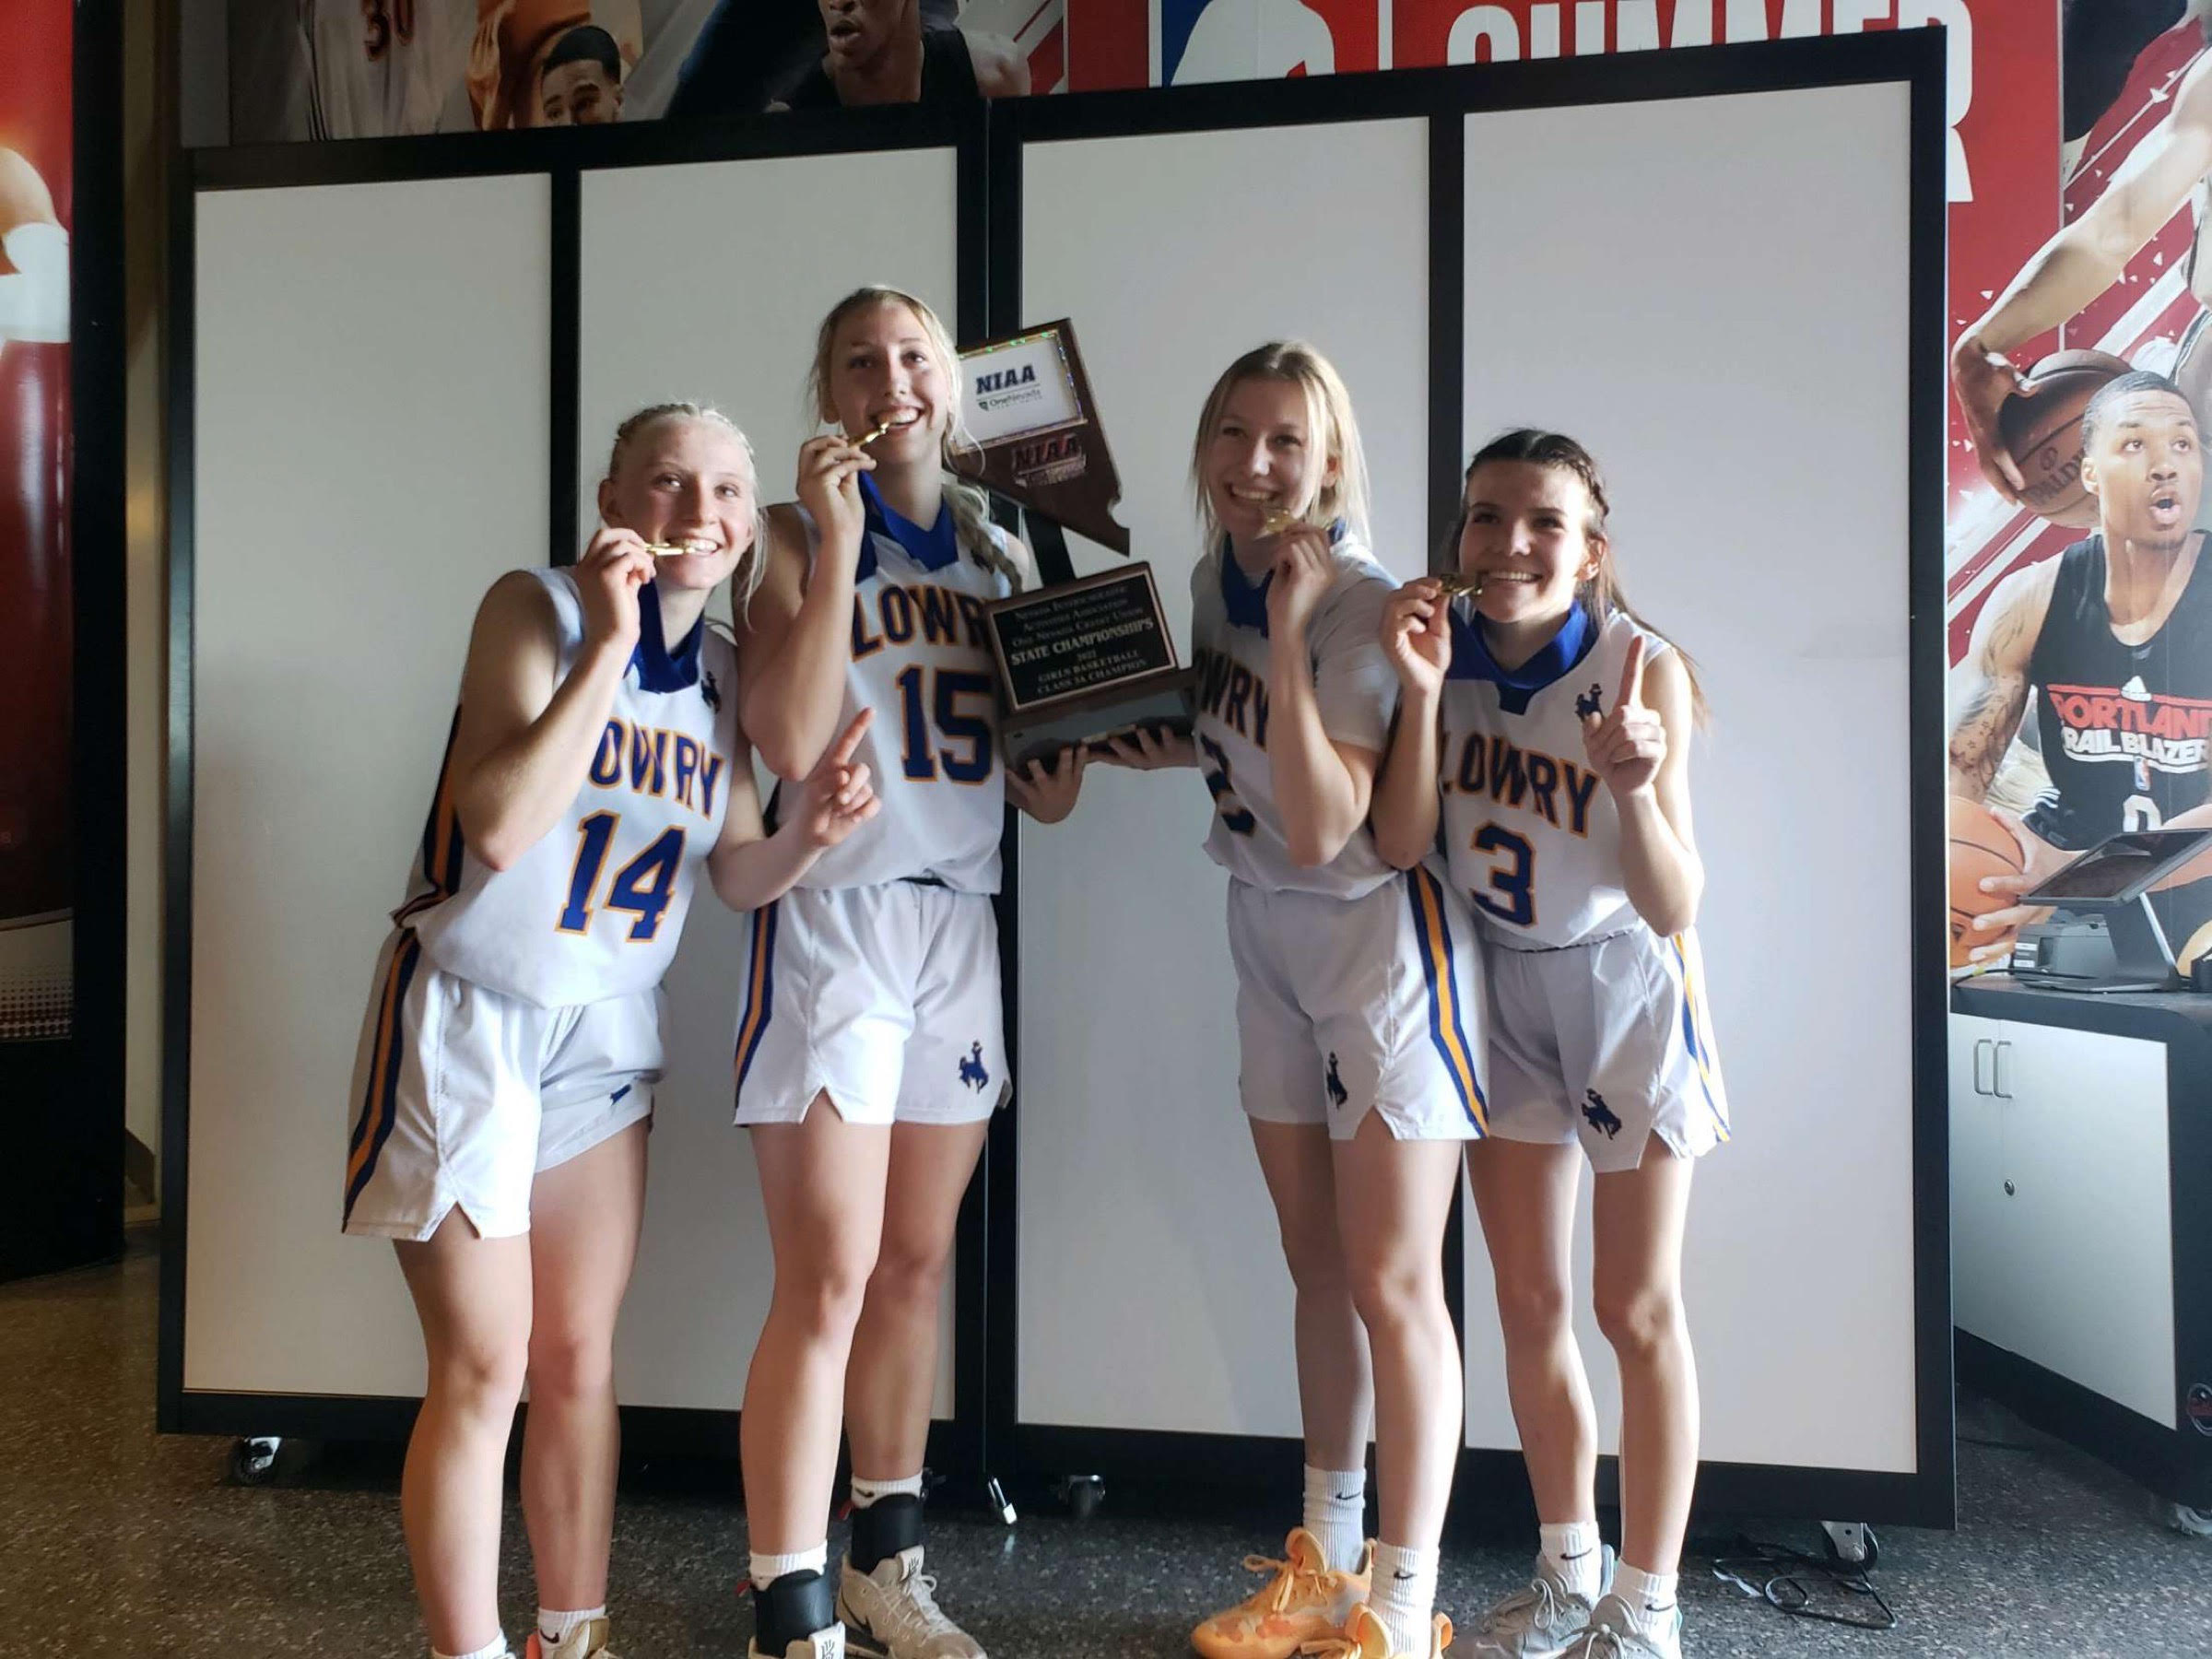 Senior team captains pose with the trophy after winning state in Las Vegas. /Courtesy • Lisa Scott